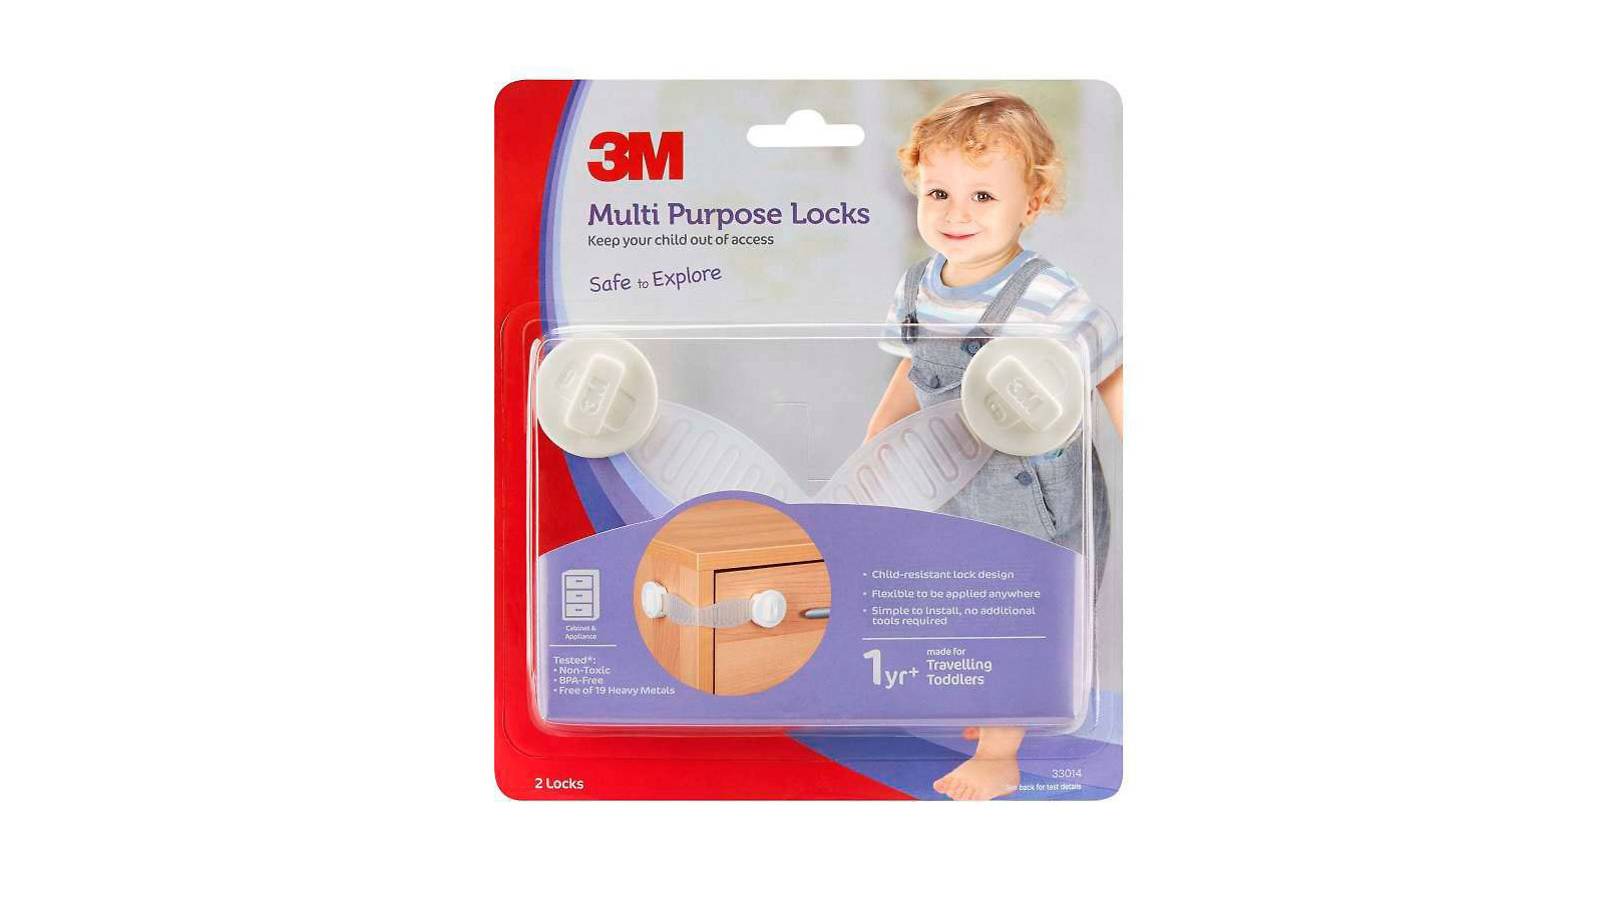 Babies-BUYER’S-GUIDE-Top-products-to-babyproof-your-home-3MMultiPurpose